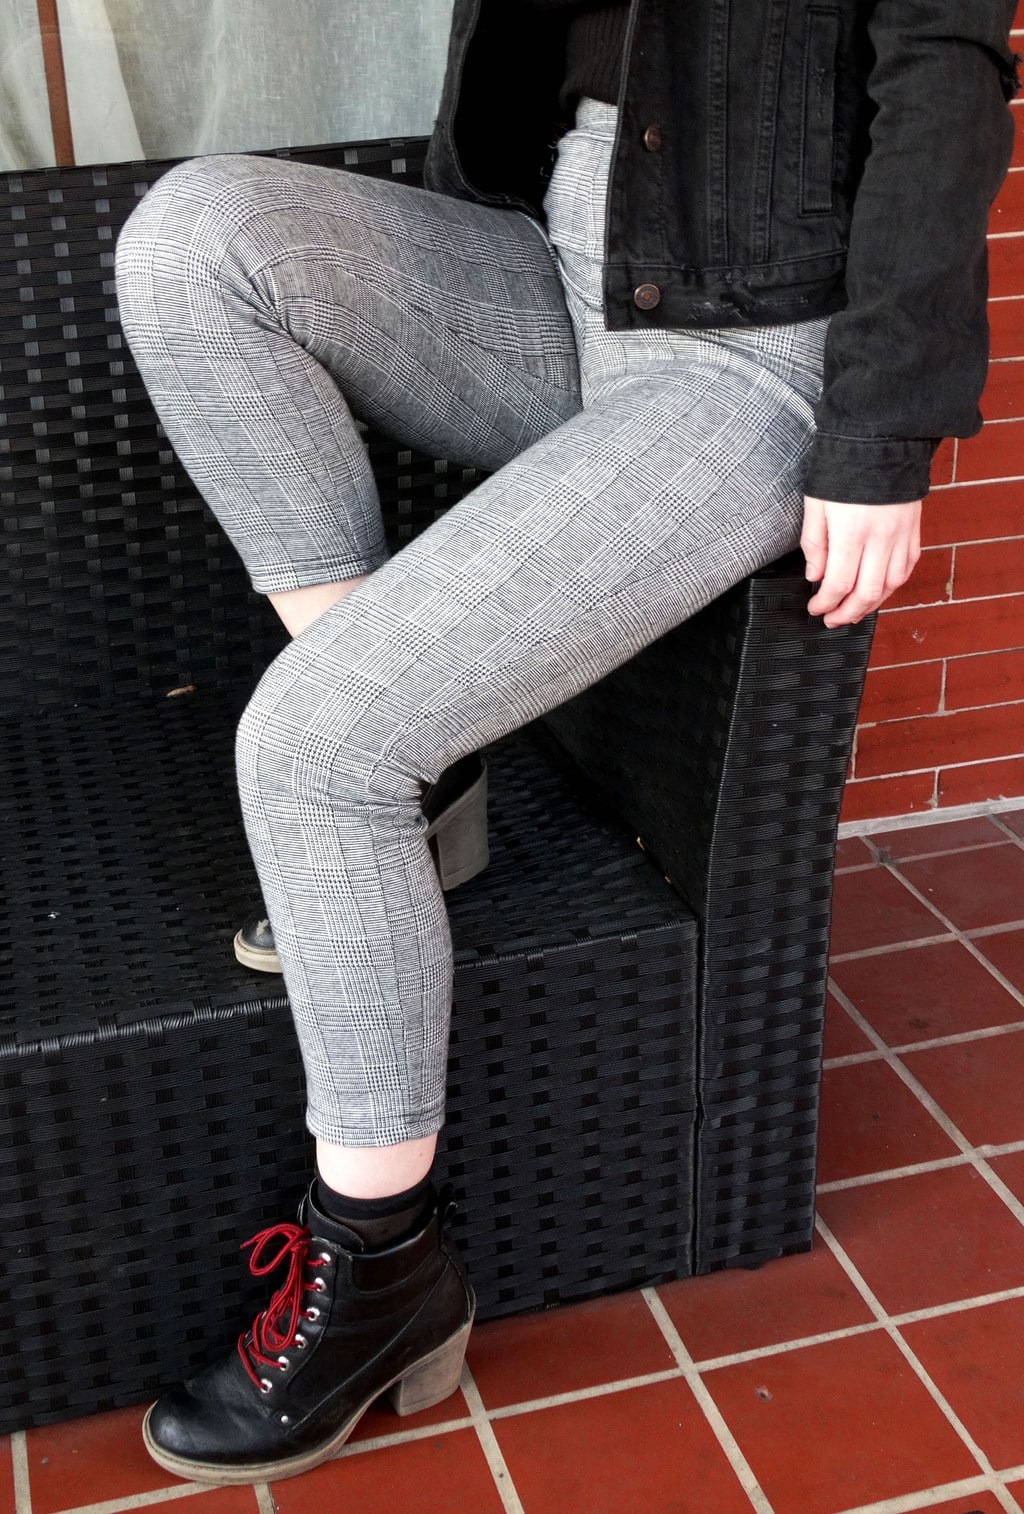 These white and grey checkered pants are perfect for this West Virginia University student's grunge look.